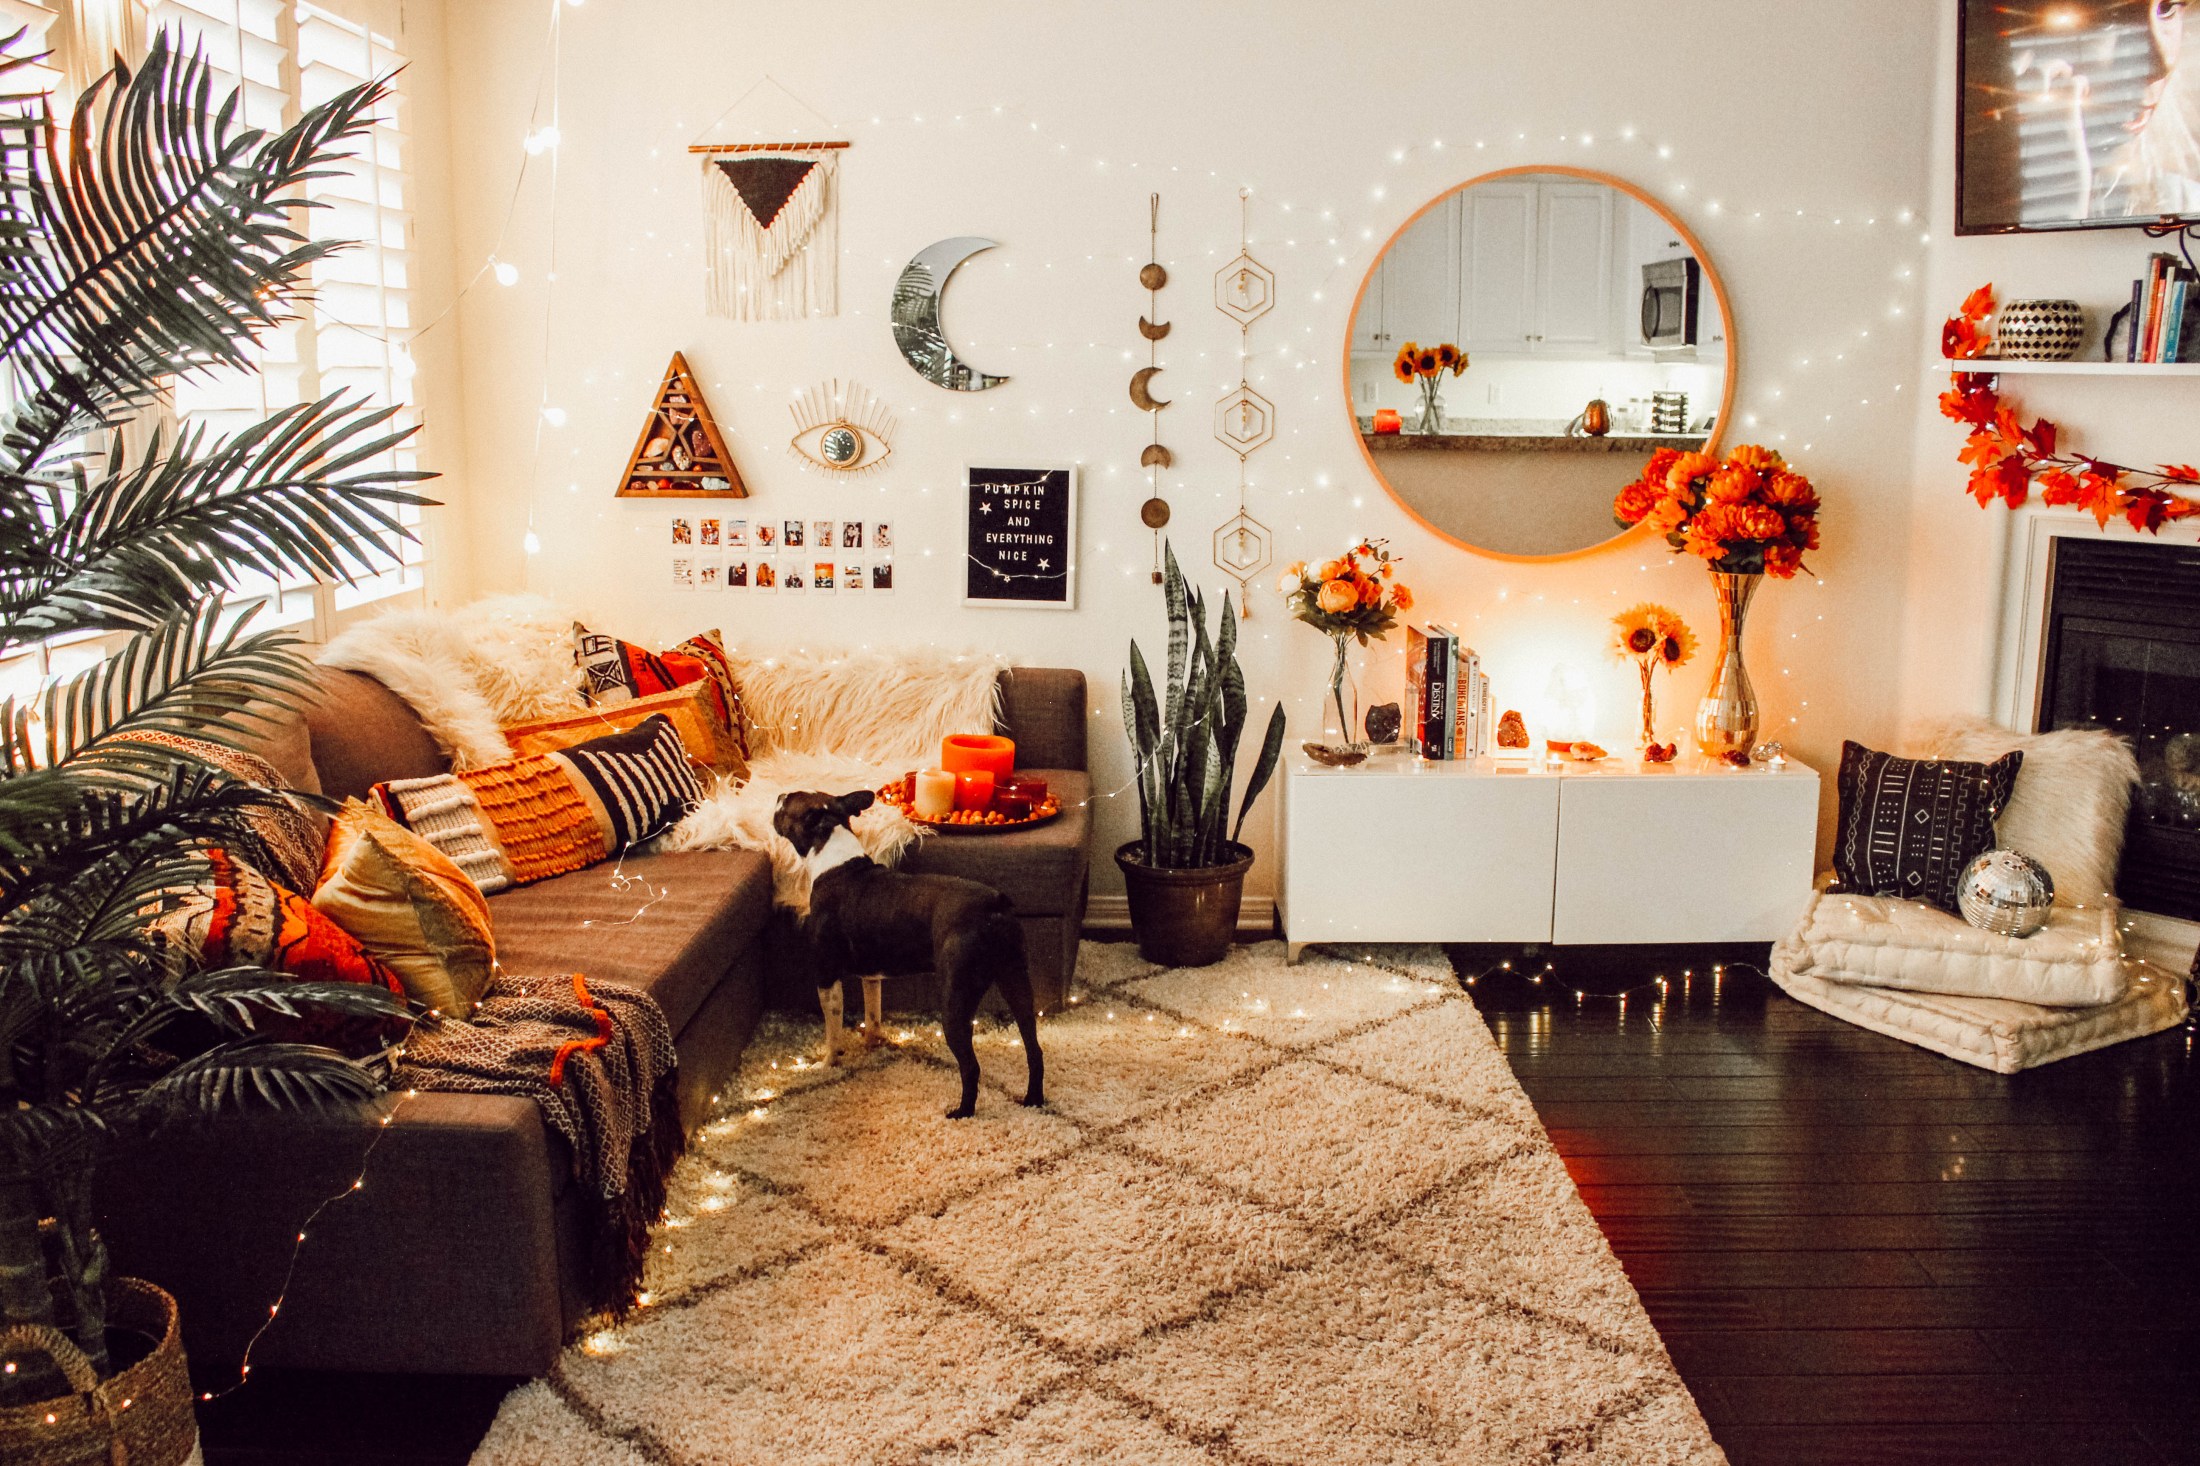 Inspirational Home Decor: Creating A Light Filled And Joyful Space